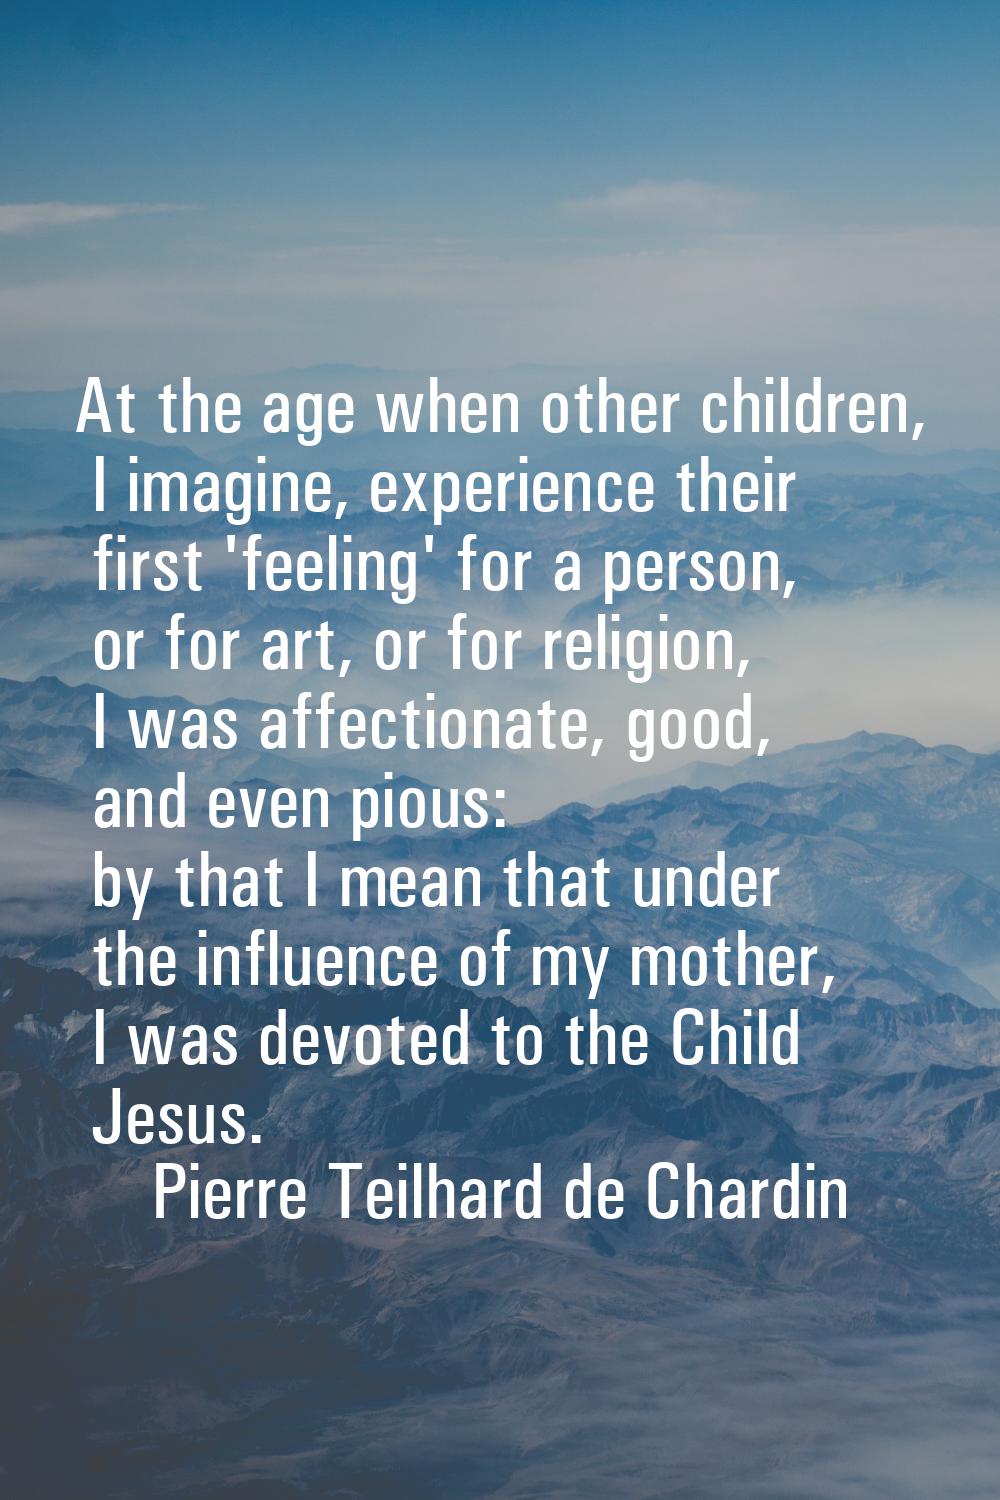 At the age when other children, I imagine, experience their first 'feeling' for a person, or for ar